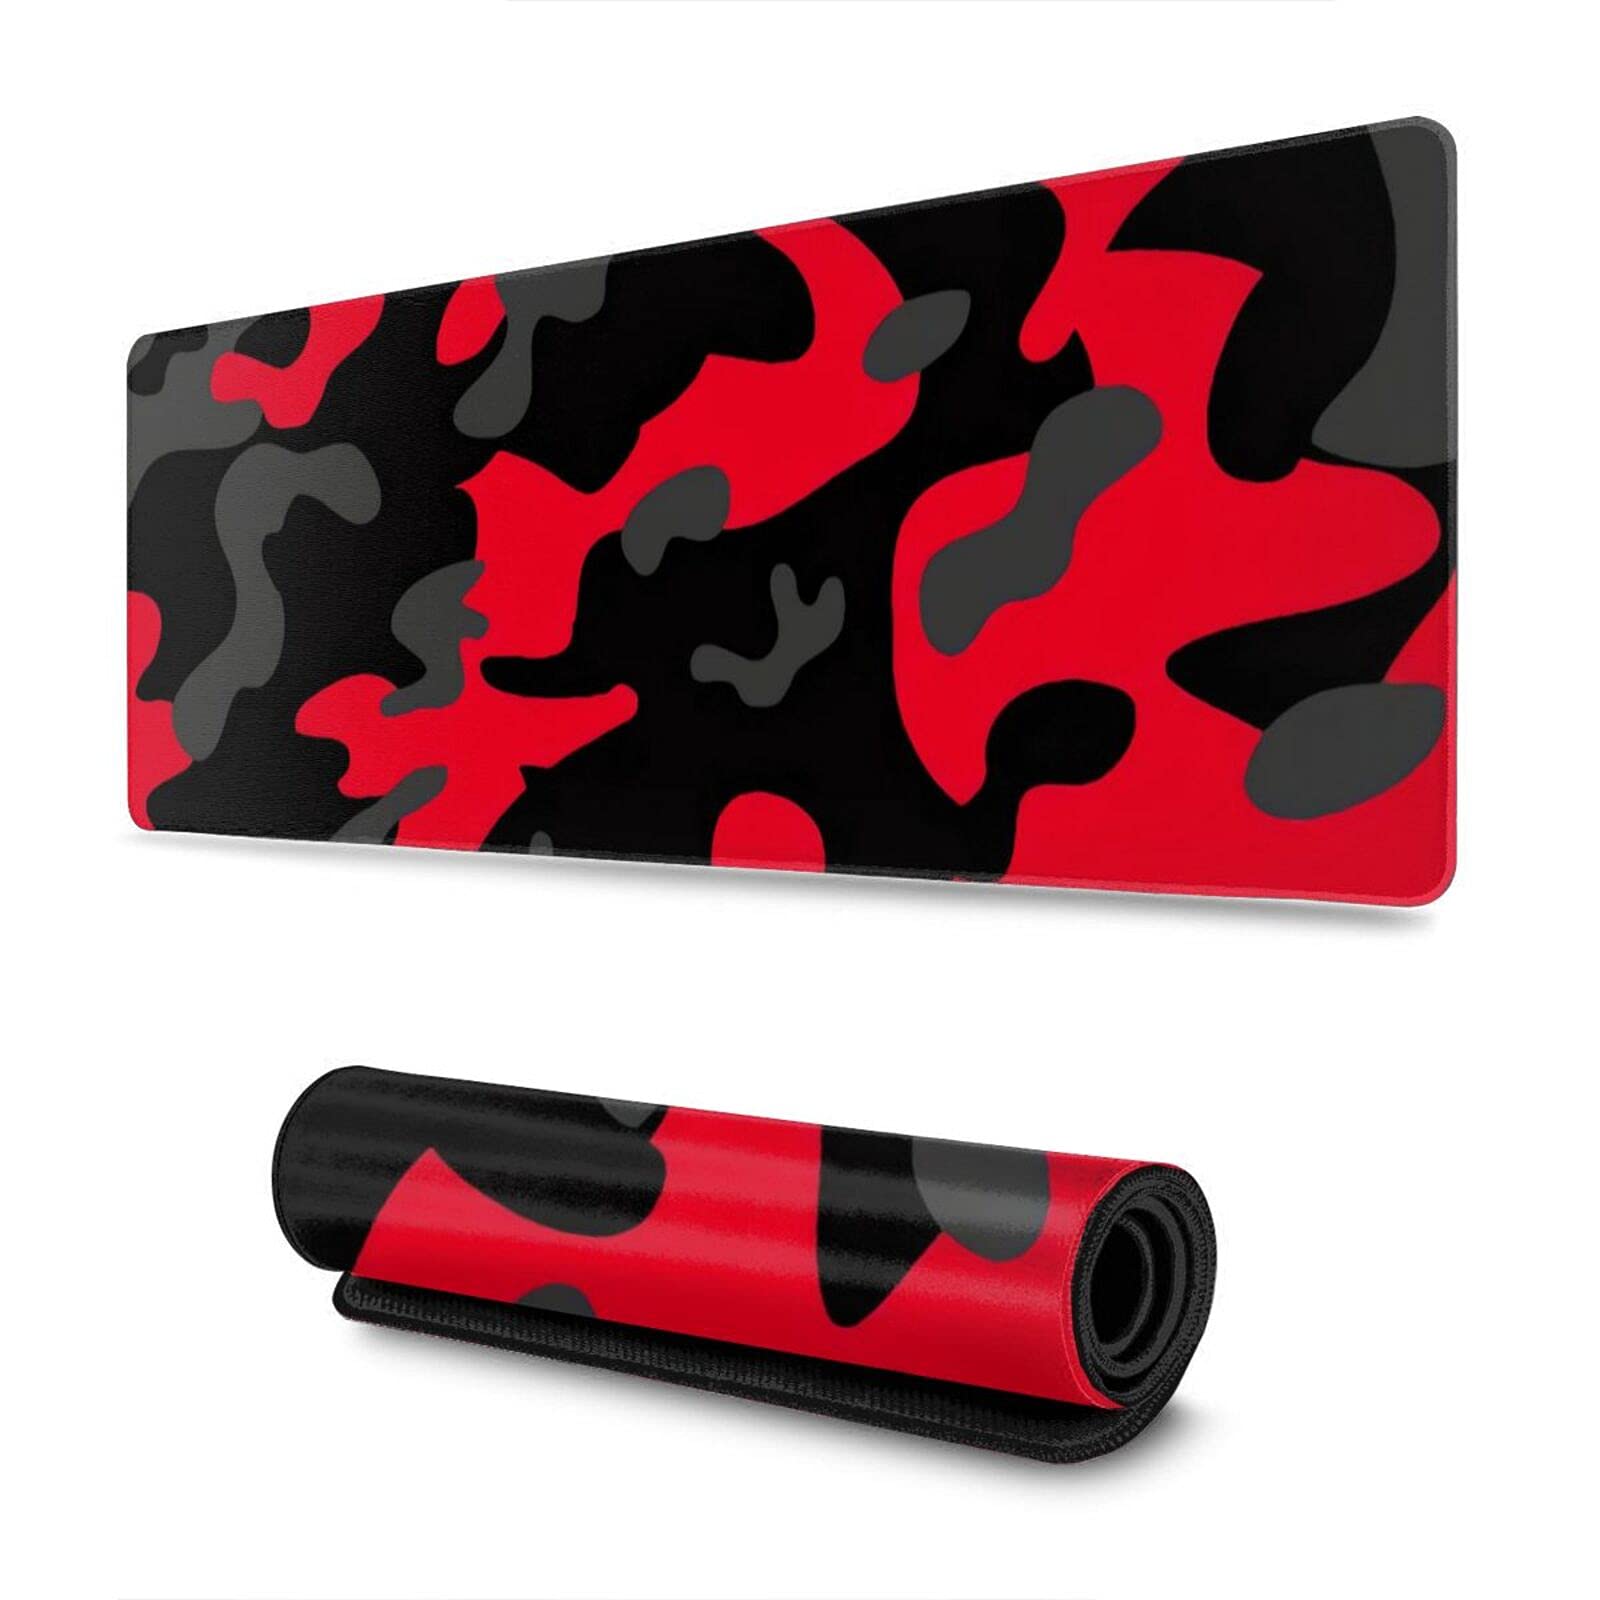 Red and Black Gaming Mouse Pad Large XL Desk Mat Camo Camouflage Long Extended Pads Big Mousepad Home Office Decor Accessories for Computer Pc Laptop